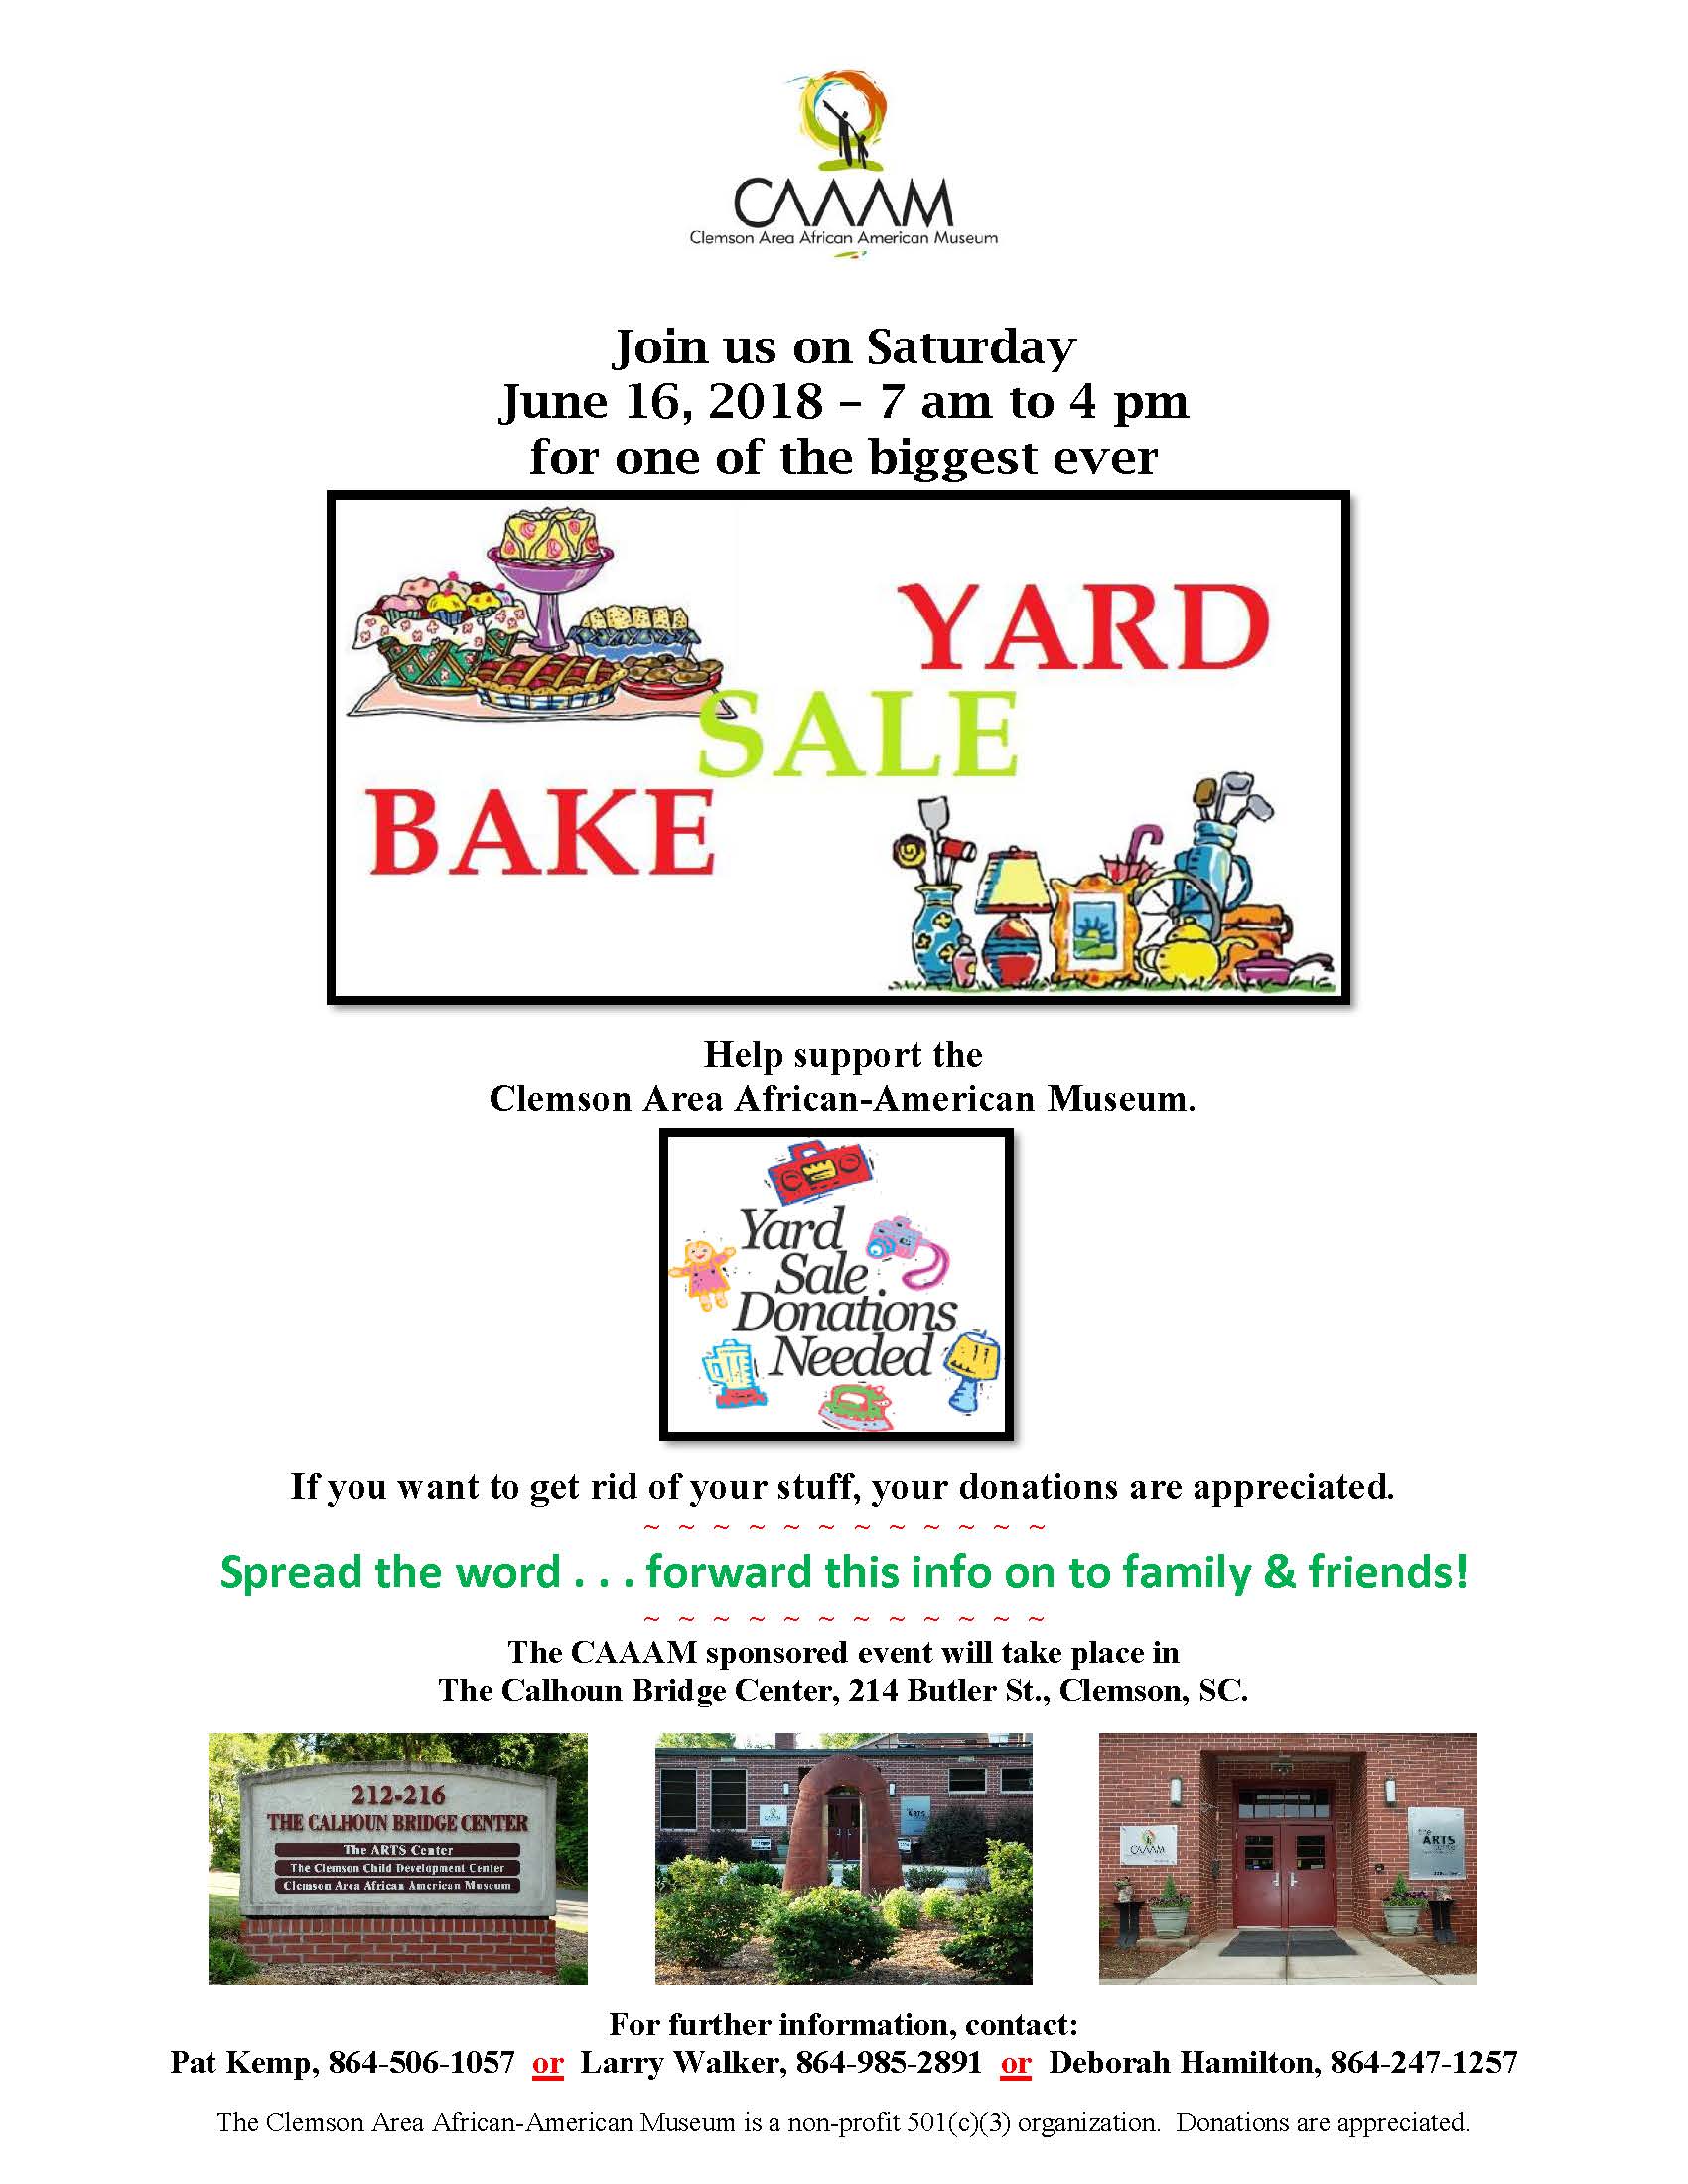 CAAAM Biggest Yard Sale Ever June 16, 2018 7am to 4pm